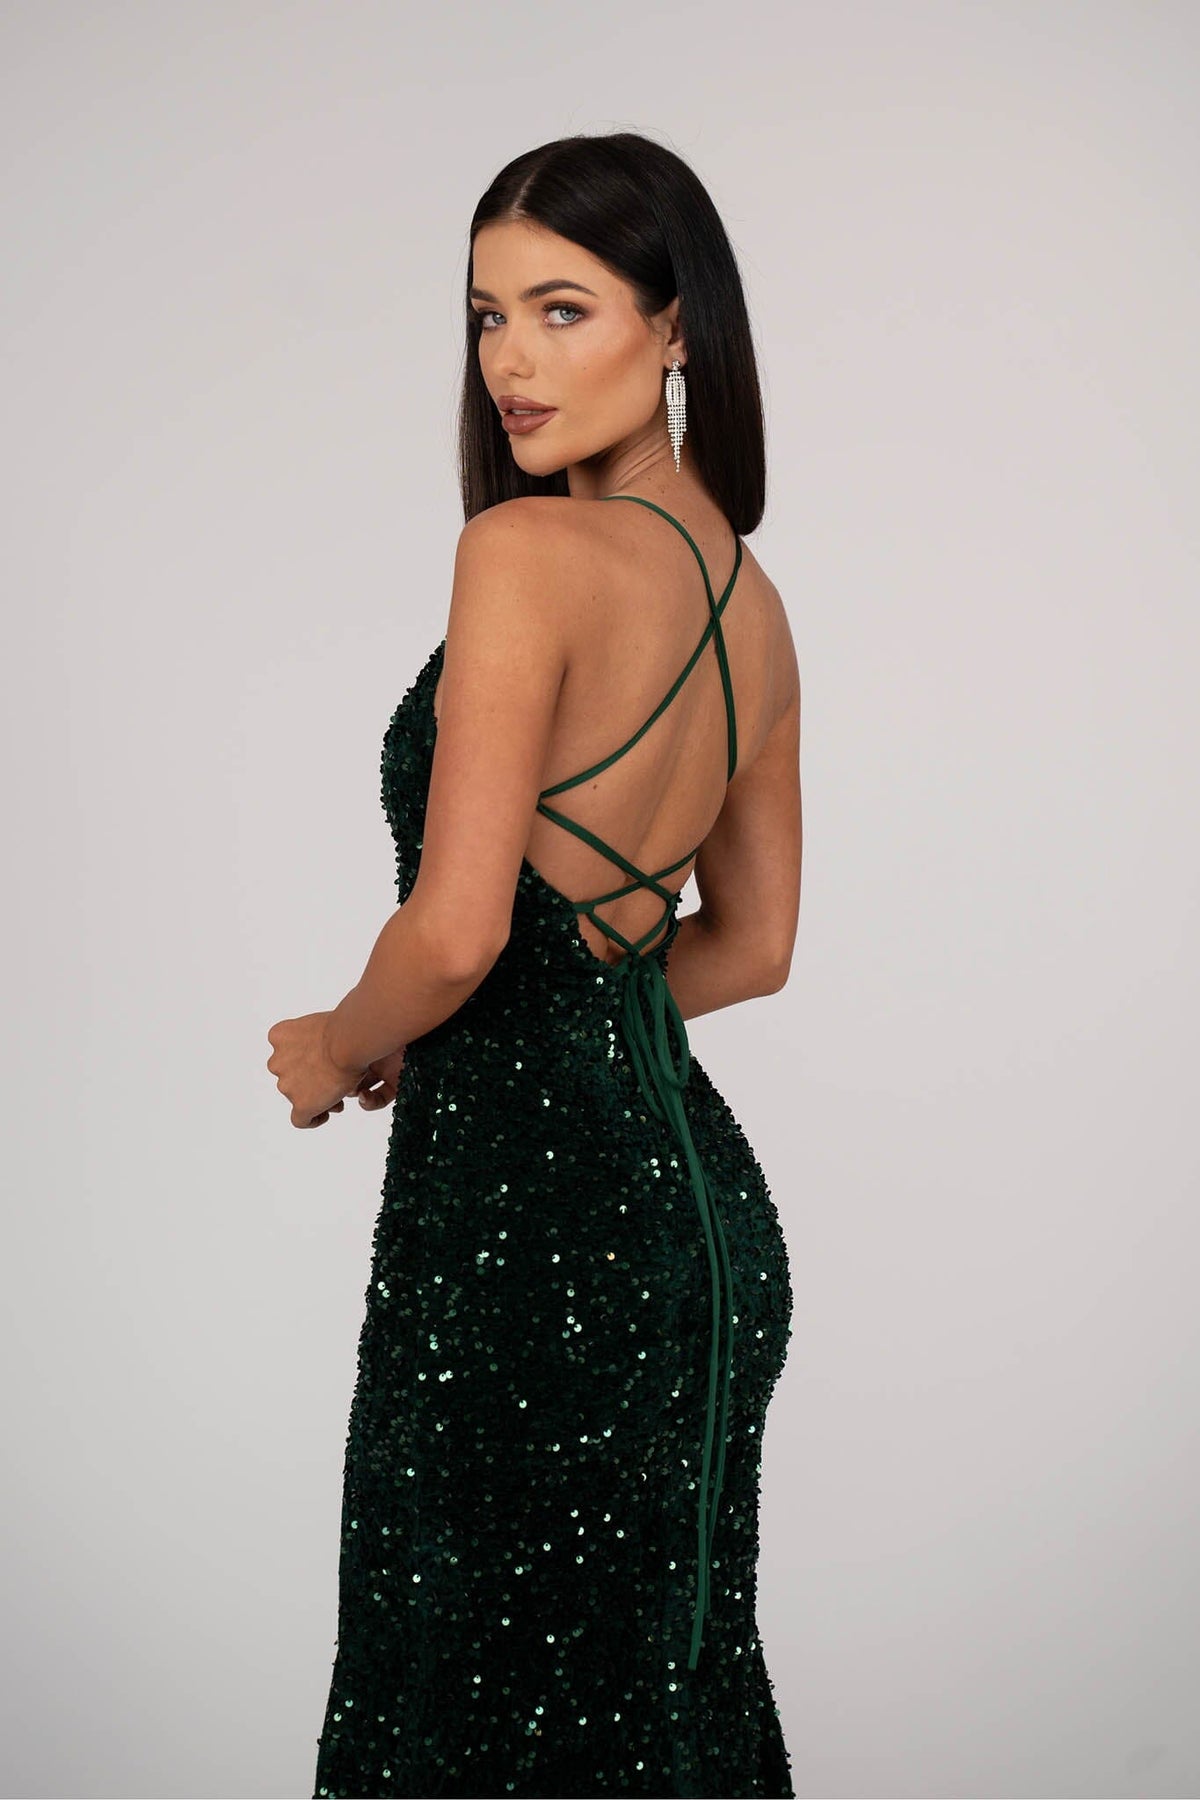 Close Up Image of Lace Up Open Back Design of Emerald Green Velvet Sequin Full Length Evening Gown with V Neckline, Thin Shoulder Straps and Thigh High Side Split